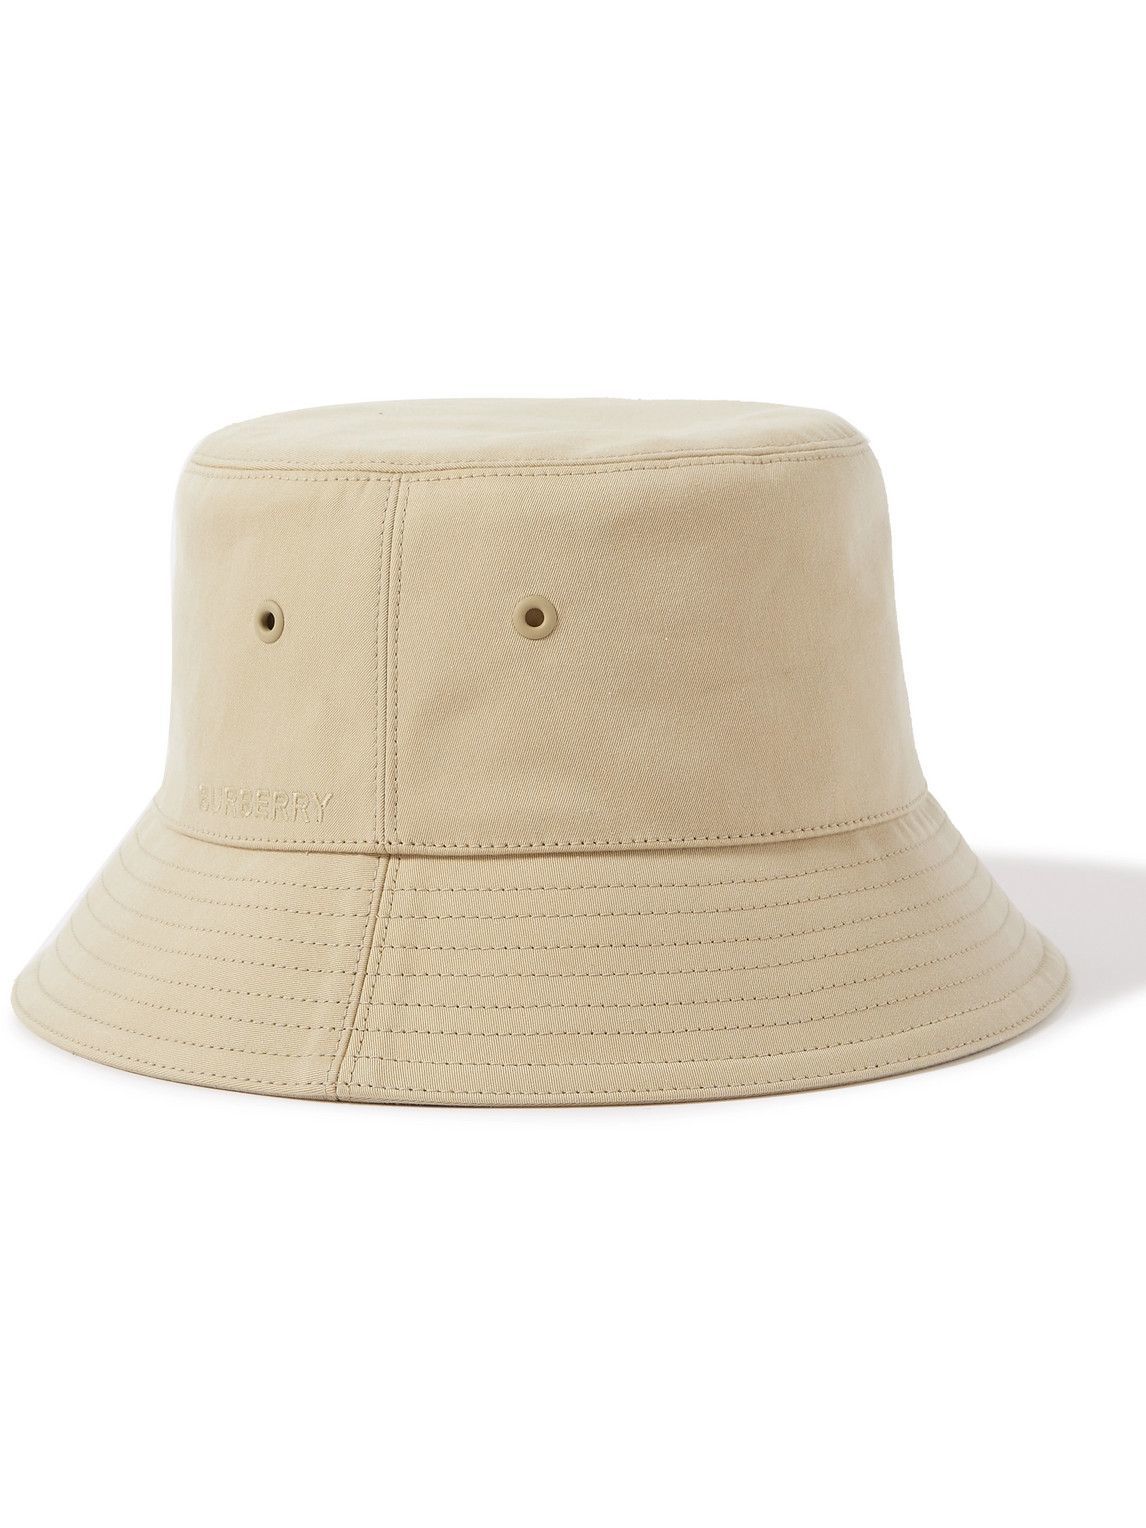 Burberry - Reversible Logo-Embroidered Cotton-Twill Bucket Hat ...